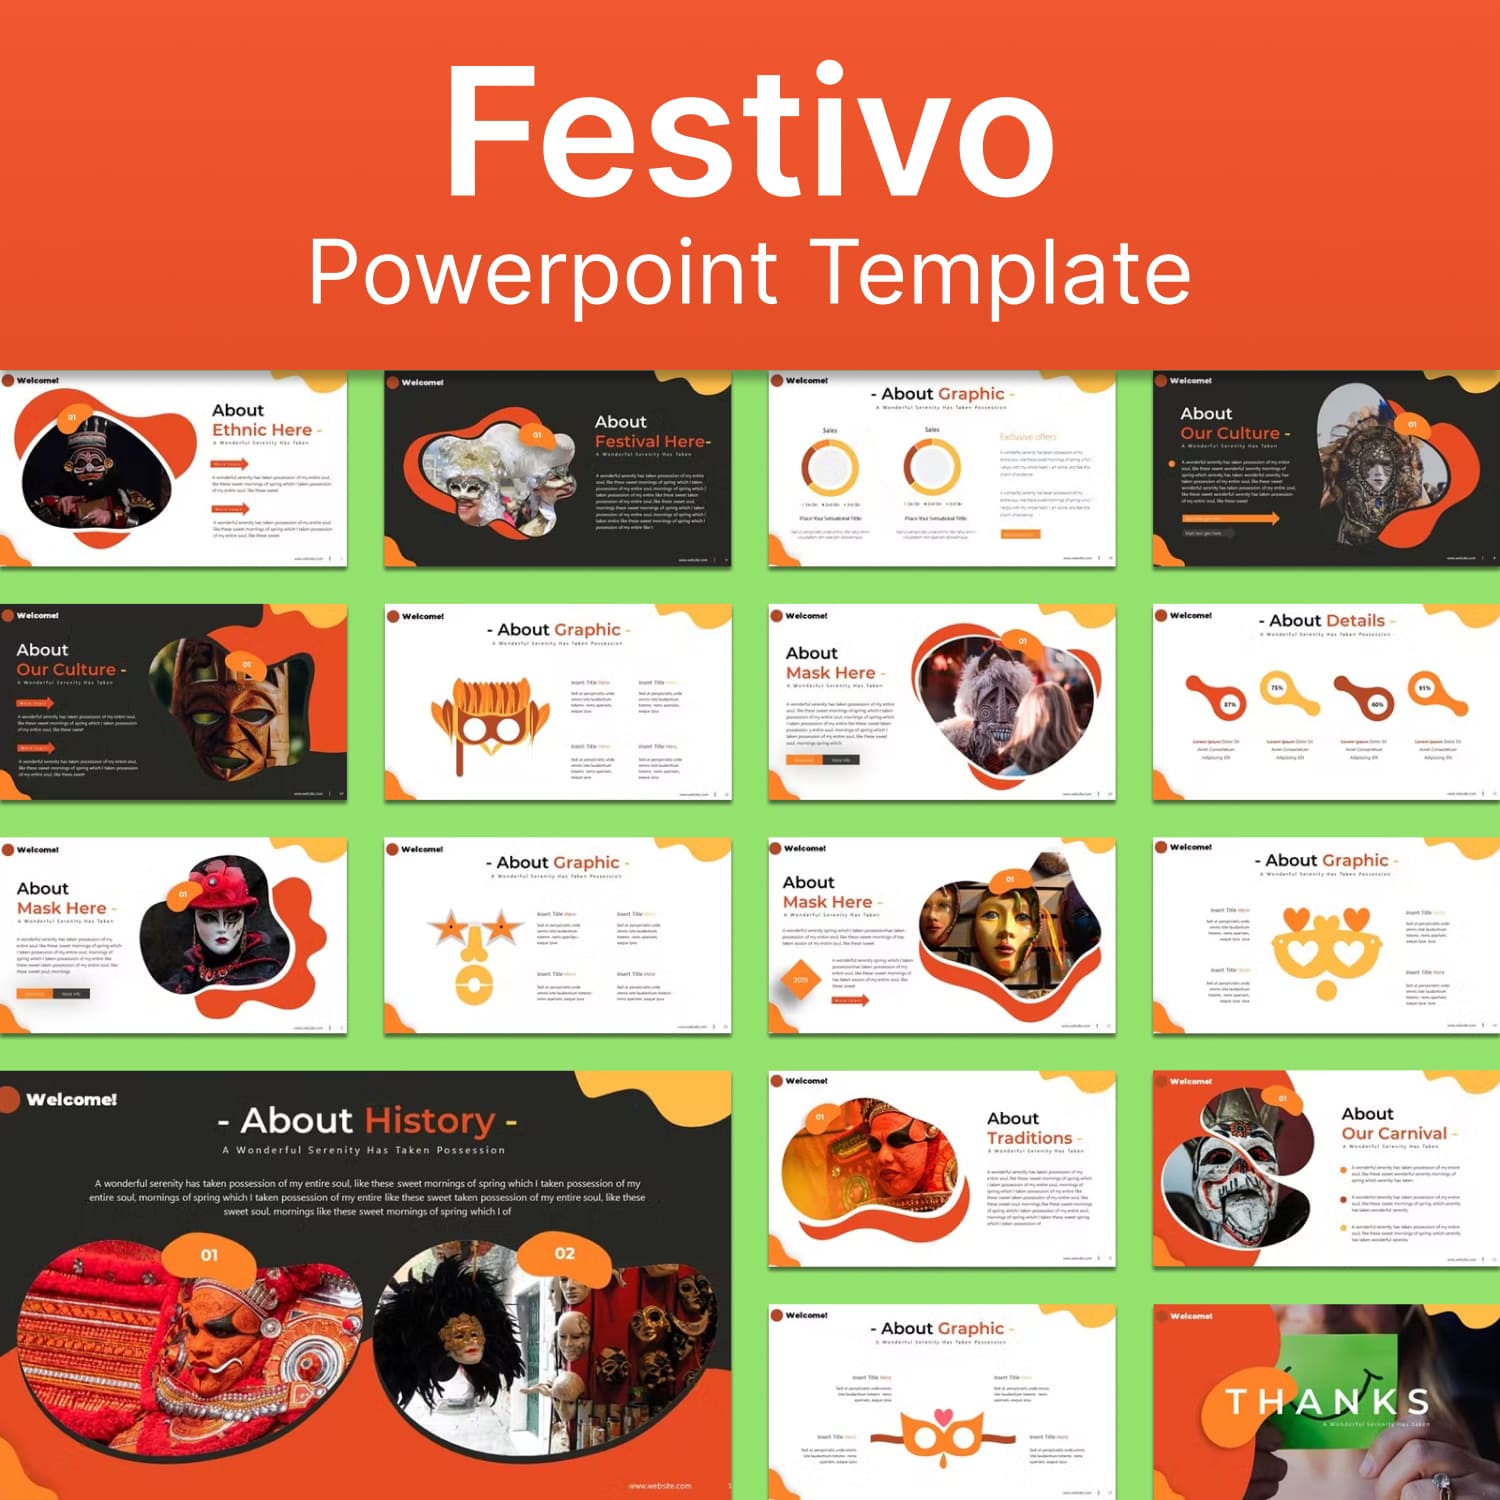 Festivo powerpoint template - main image preview.